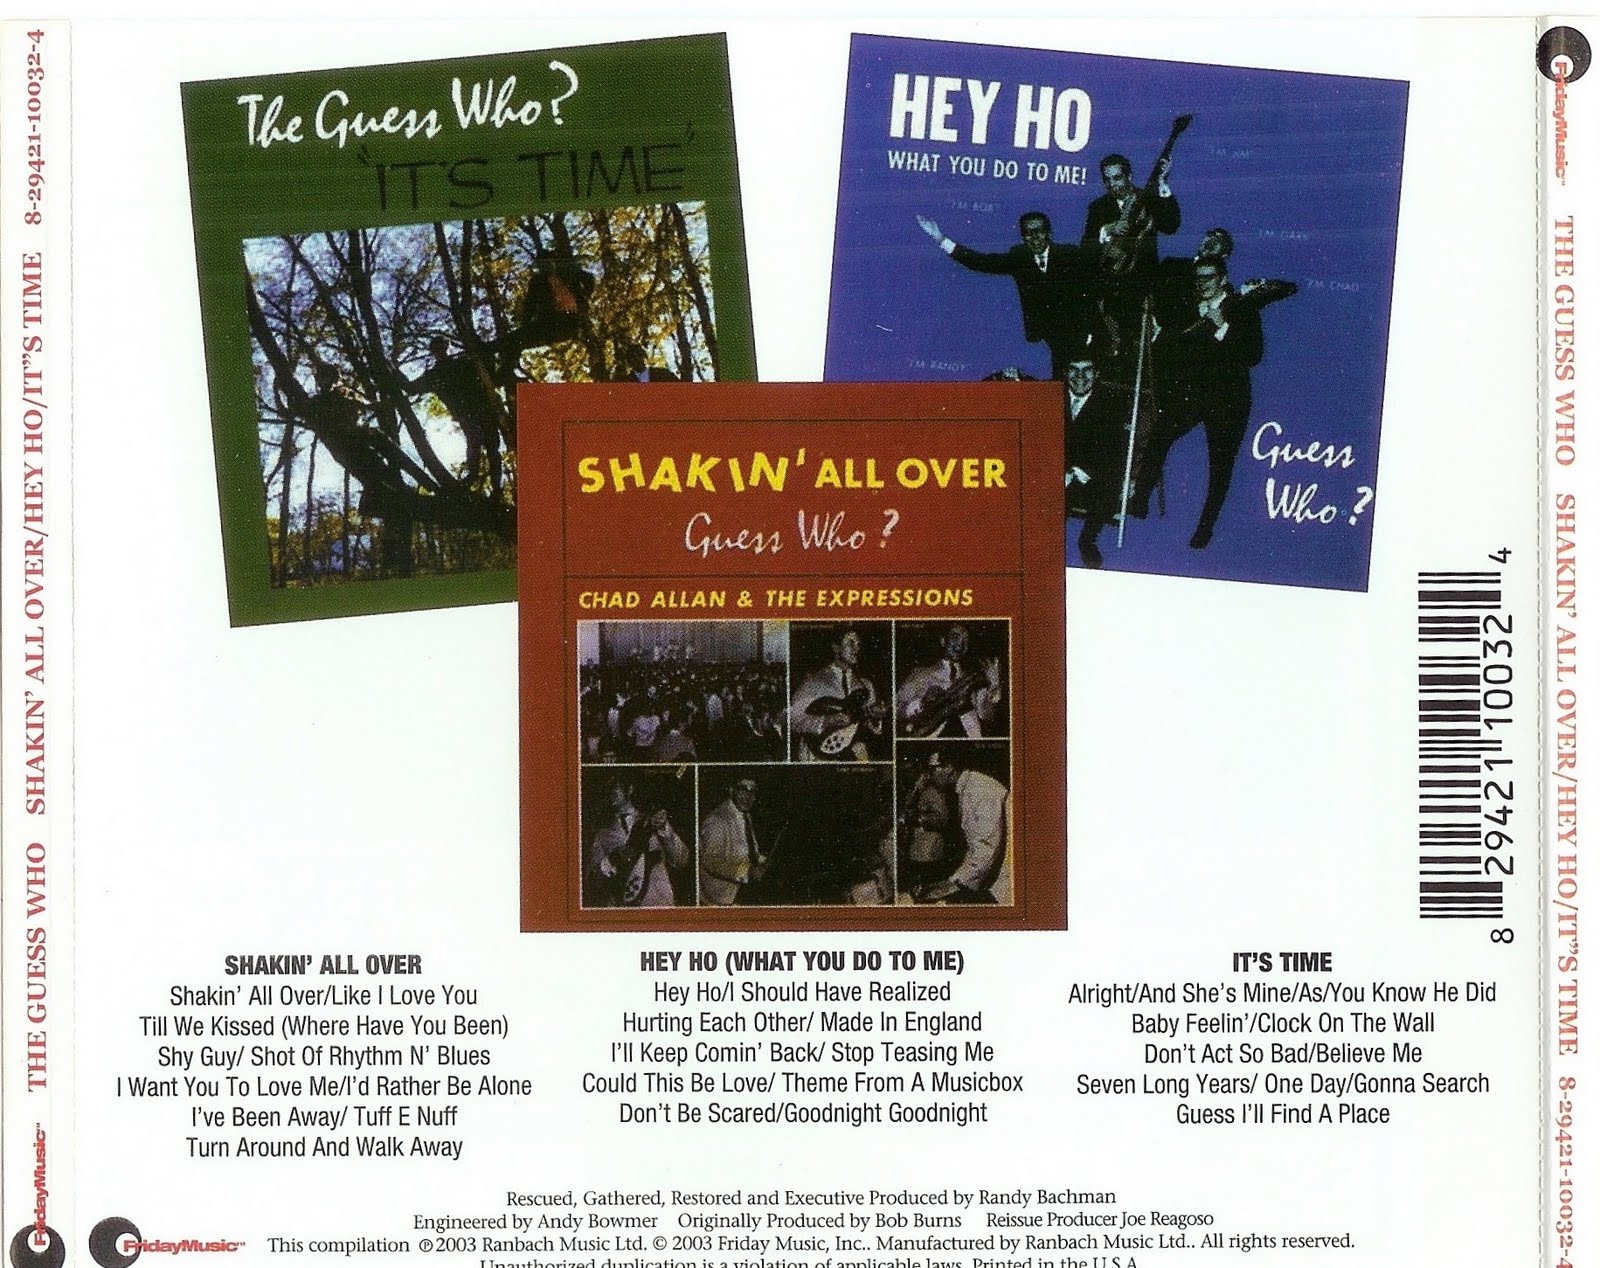 ørn Kvittering Cater Music Archive: The Guess Who - Shakin' All Over/Hey Ho! /It's Time (3  Classic Albums - 1 Great CD) 2003